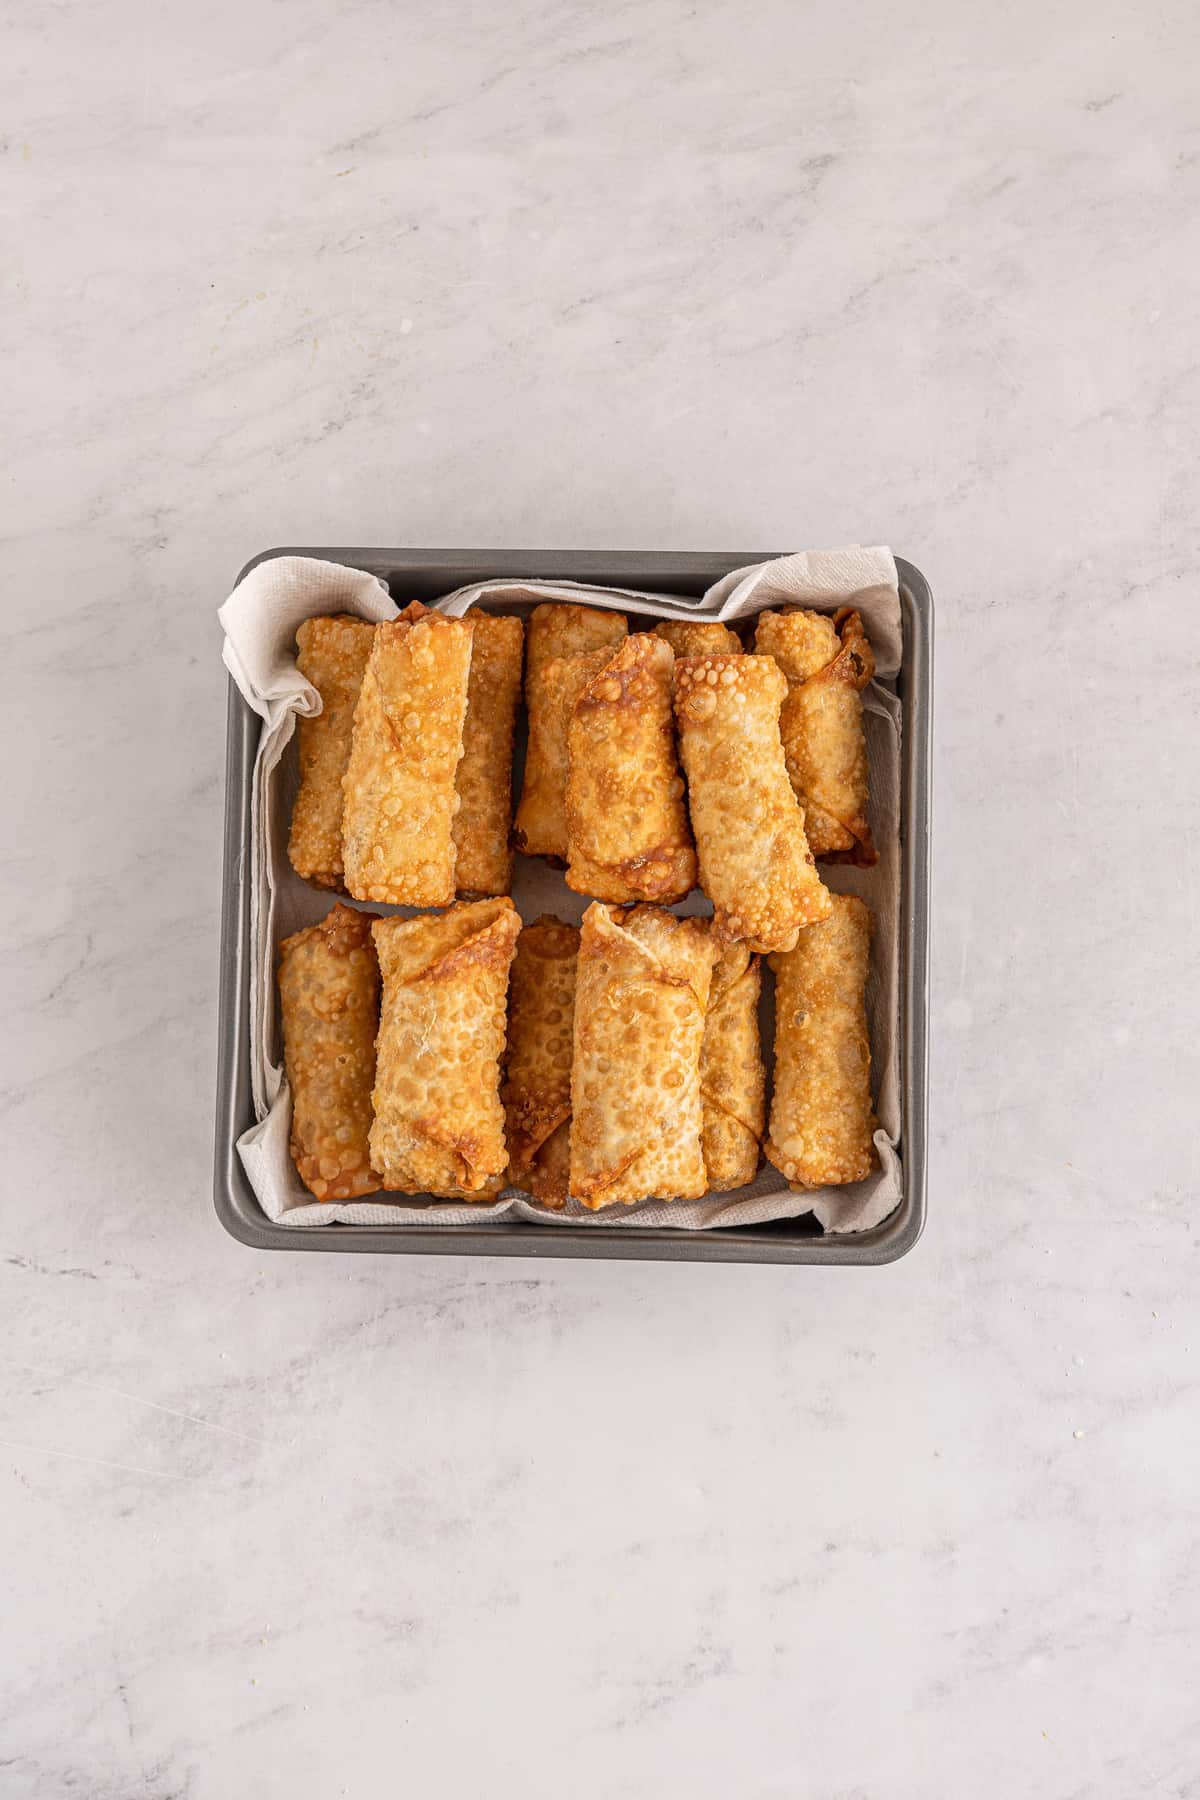 Cooked egg rolls in small square pan.